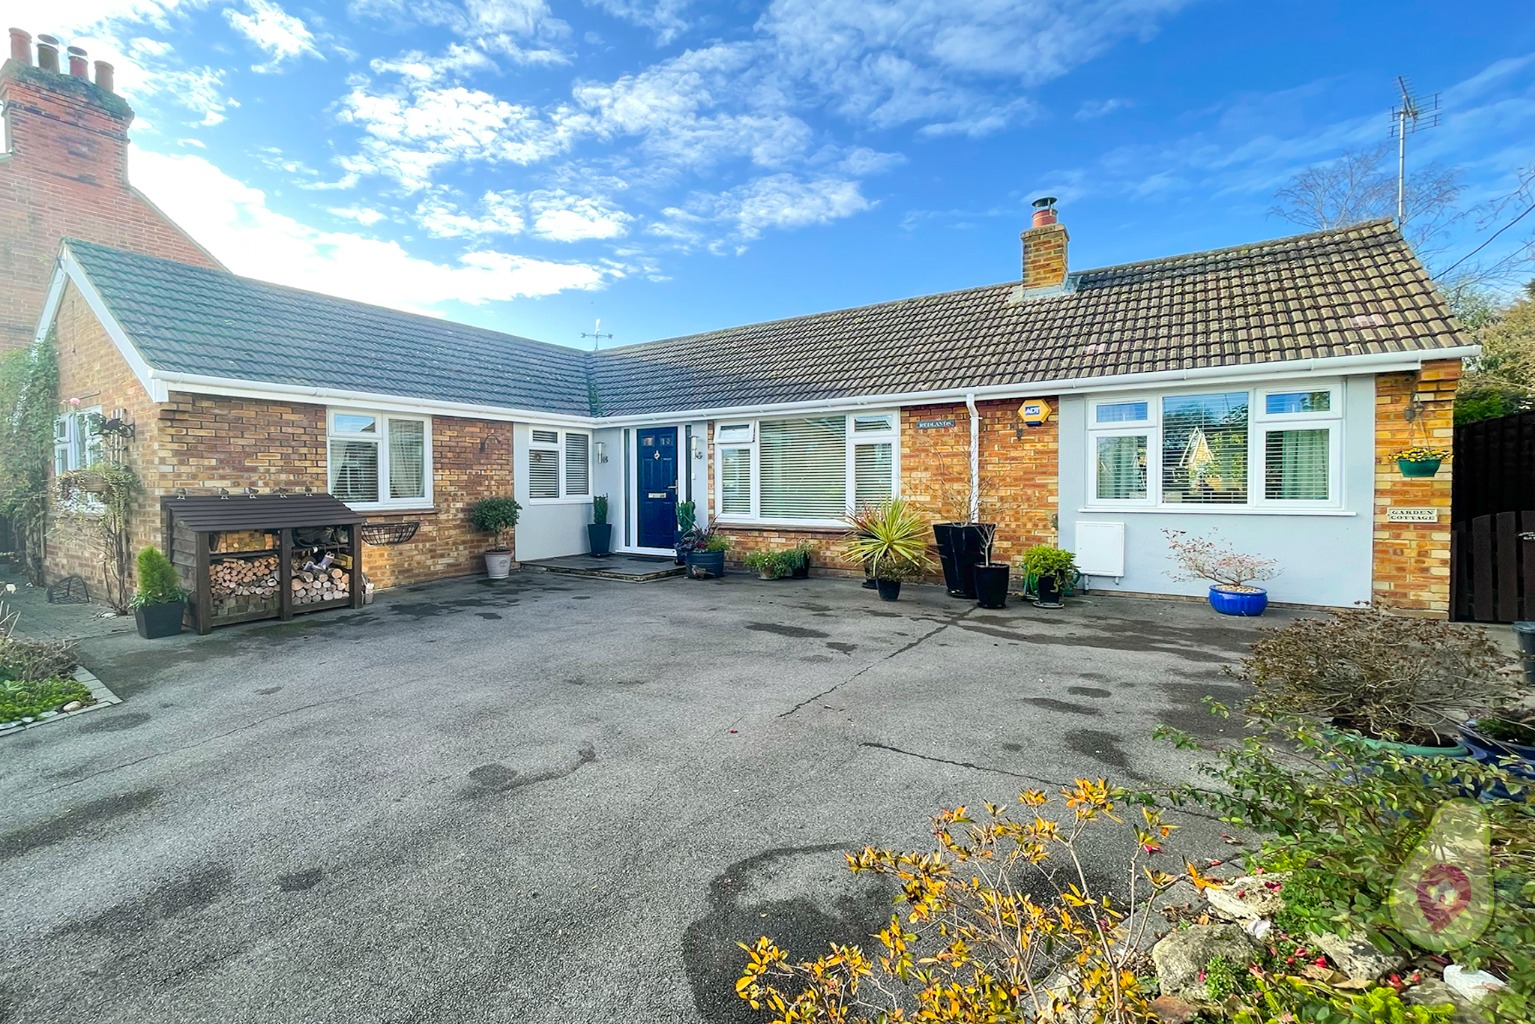 **WATCH THE PROMO VIDEO** - Three double bedroom detached bungalow, with self contained one bedroom annexe, set in mature landscaped gardens and a large driveway with ample parking. Presented in show home condition, contact us to arrange your appointment,